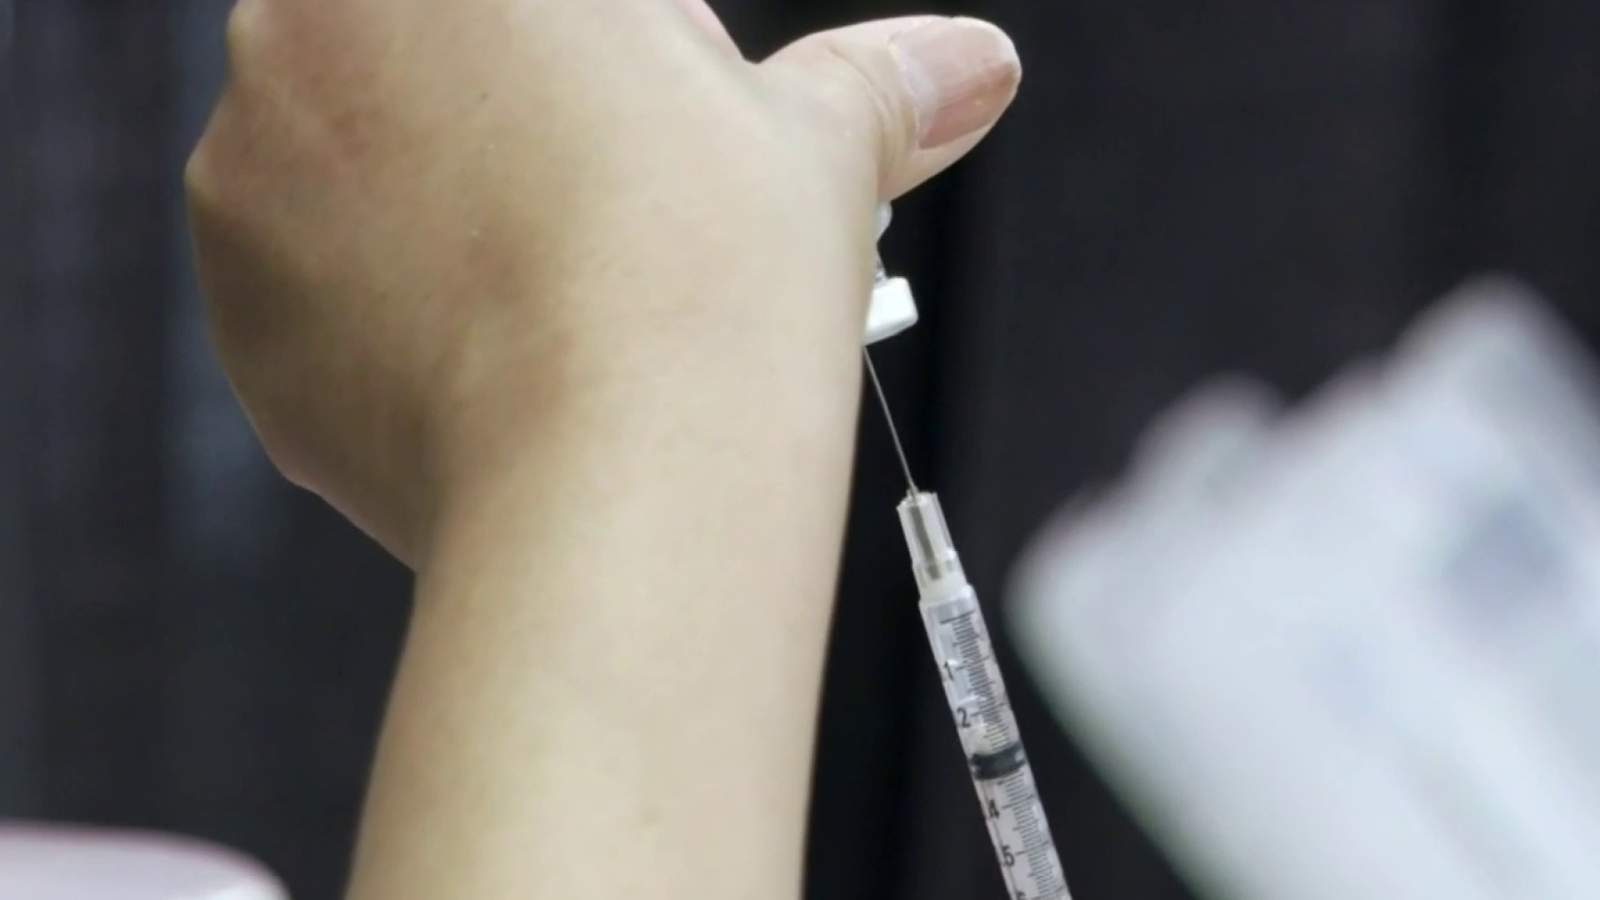 Pfizer vaccine safe, effective for young teens, company says